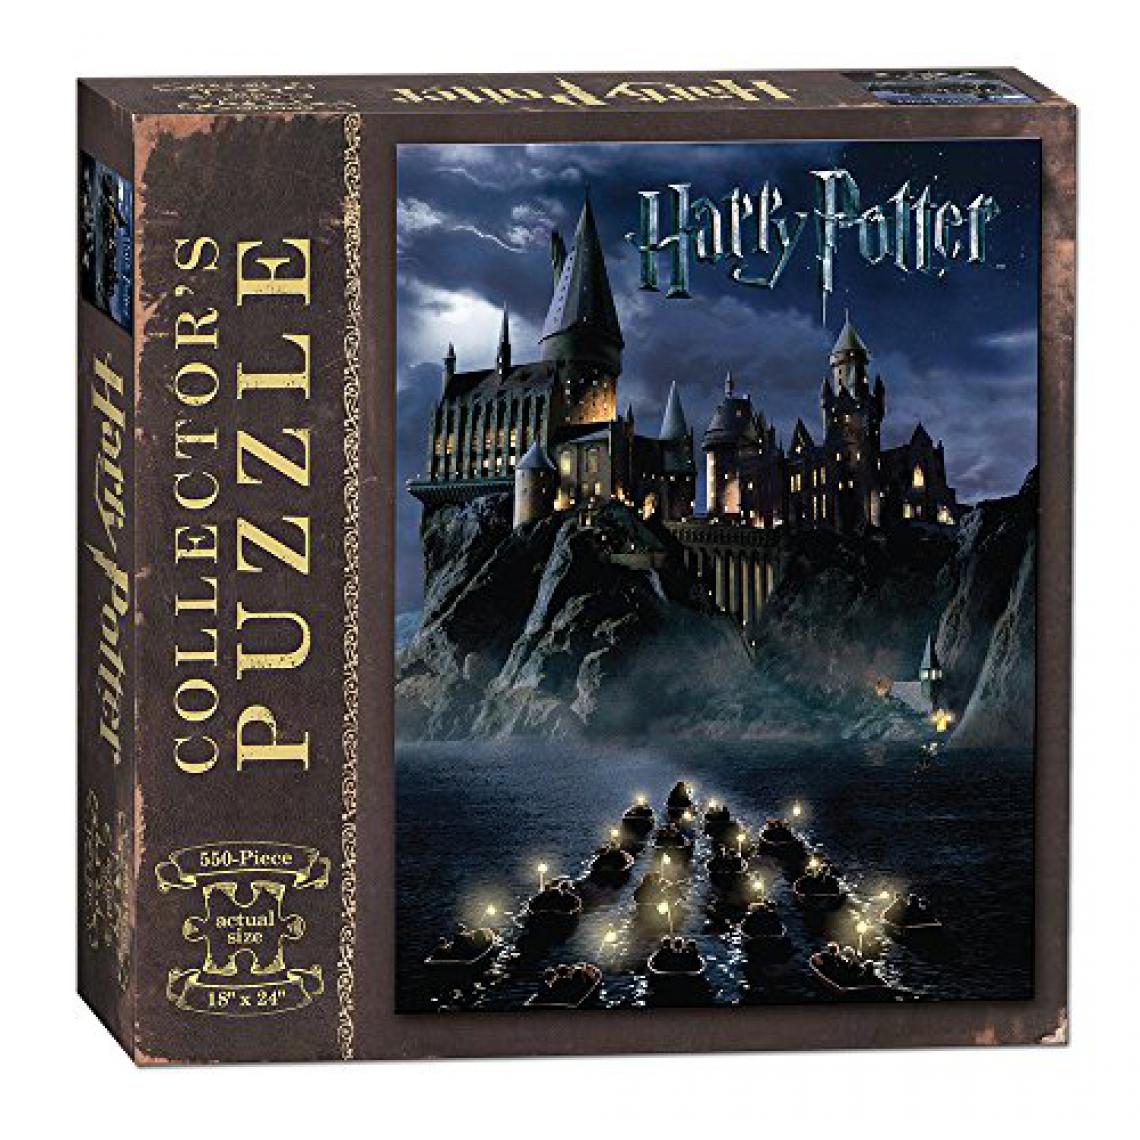 Usaopoly - USAOPOLY World of Harry Potter 550Piece Jigsaw Puzzle Art from Harry Potter & The Sorcerers Stone Movie Official Harry Potter Merchandise collectible Puzzle - Accessoires Puzzles